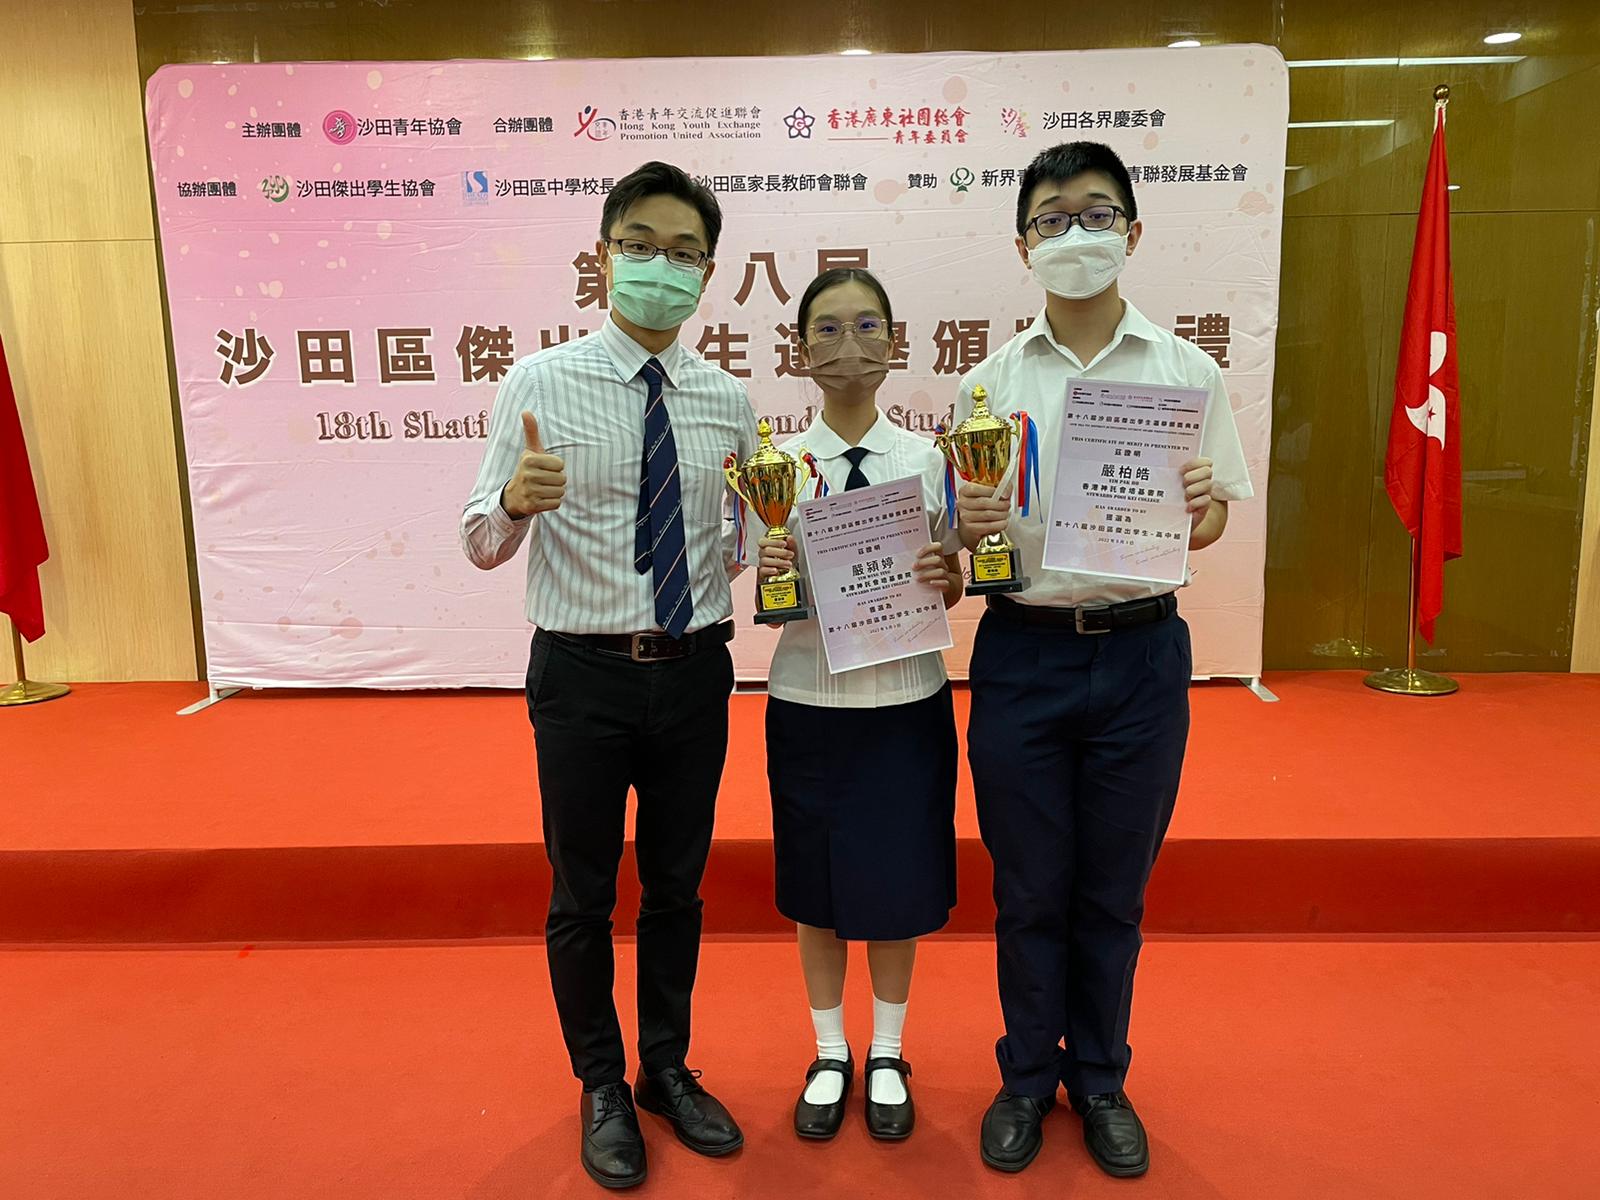 The 18th Sha Tin District Outstanding Student Award